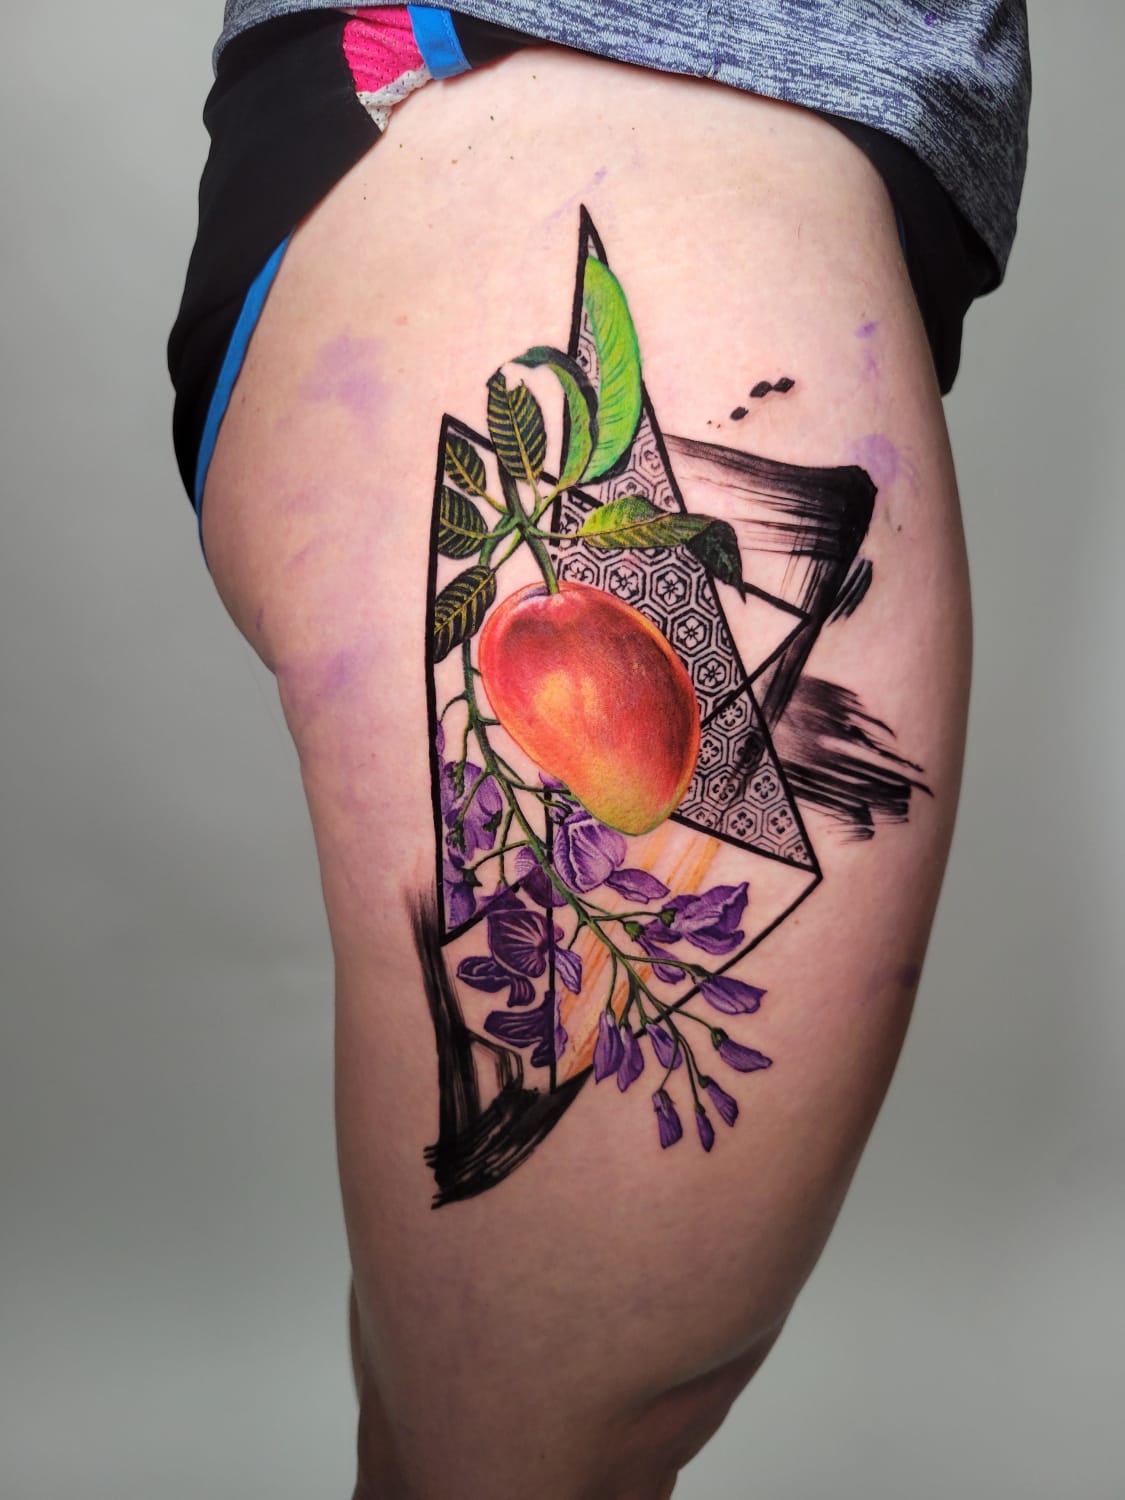 Firsrt session of my mango and wisteria flowers by @evilsteve (Instagram) at his studio in NYC